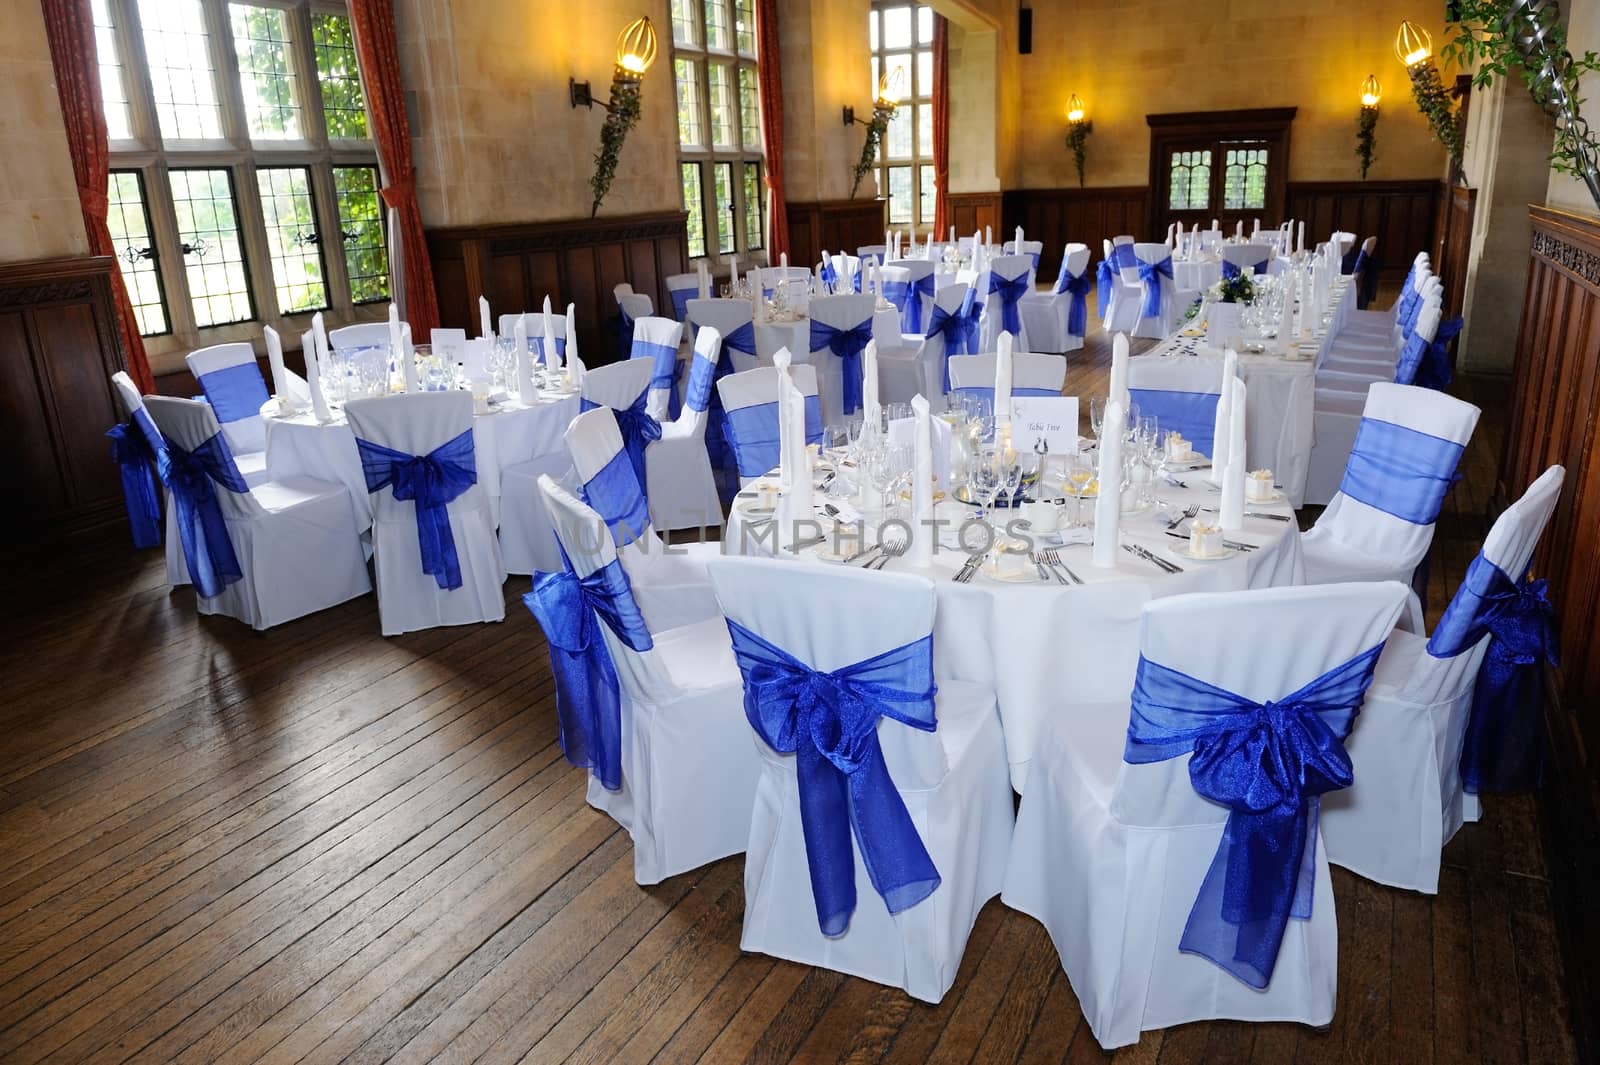 Wedding reception setting with blue and white decorations